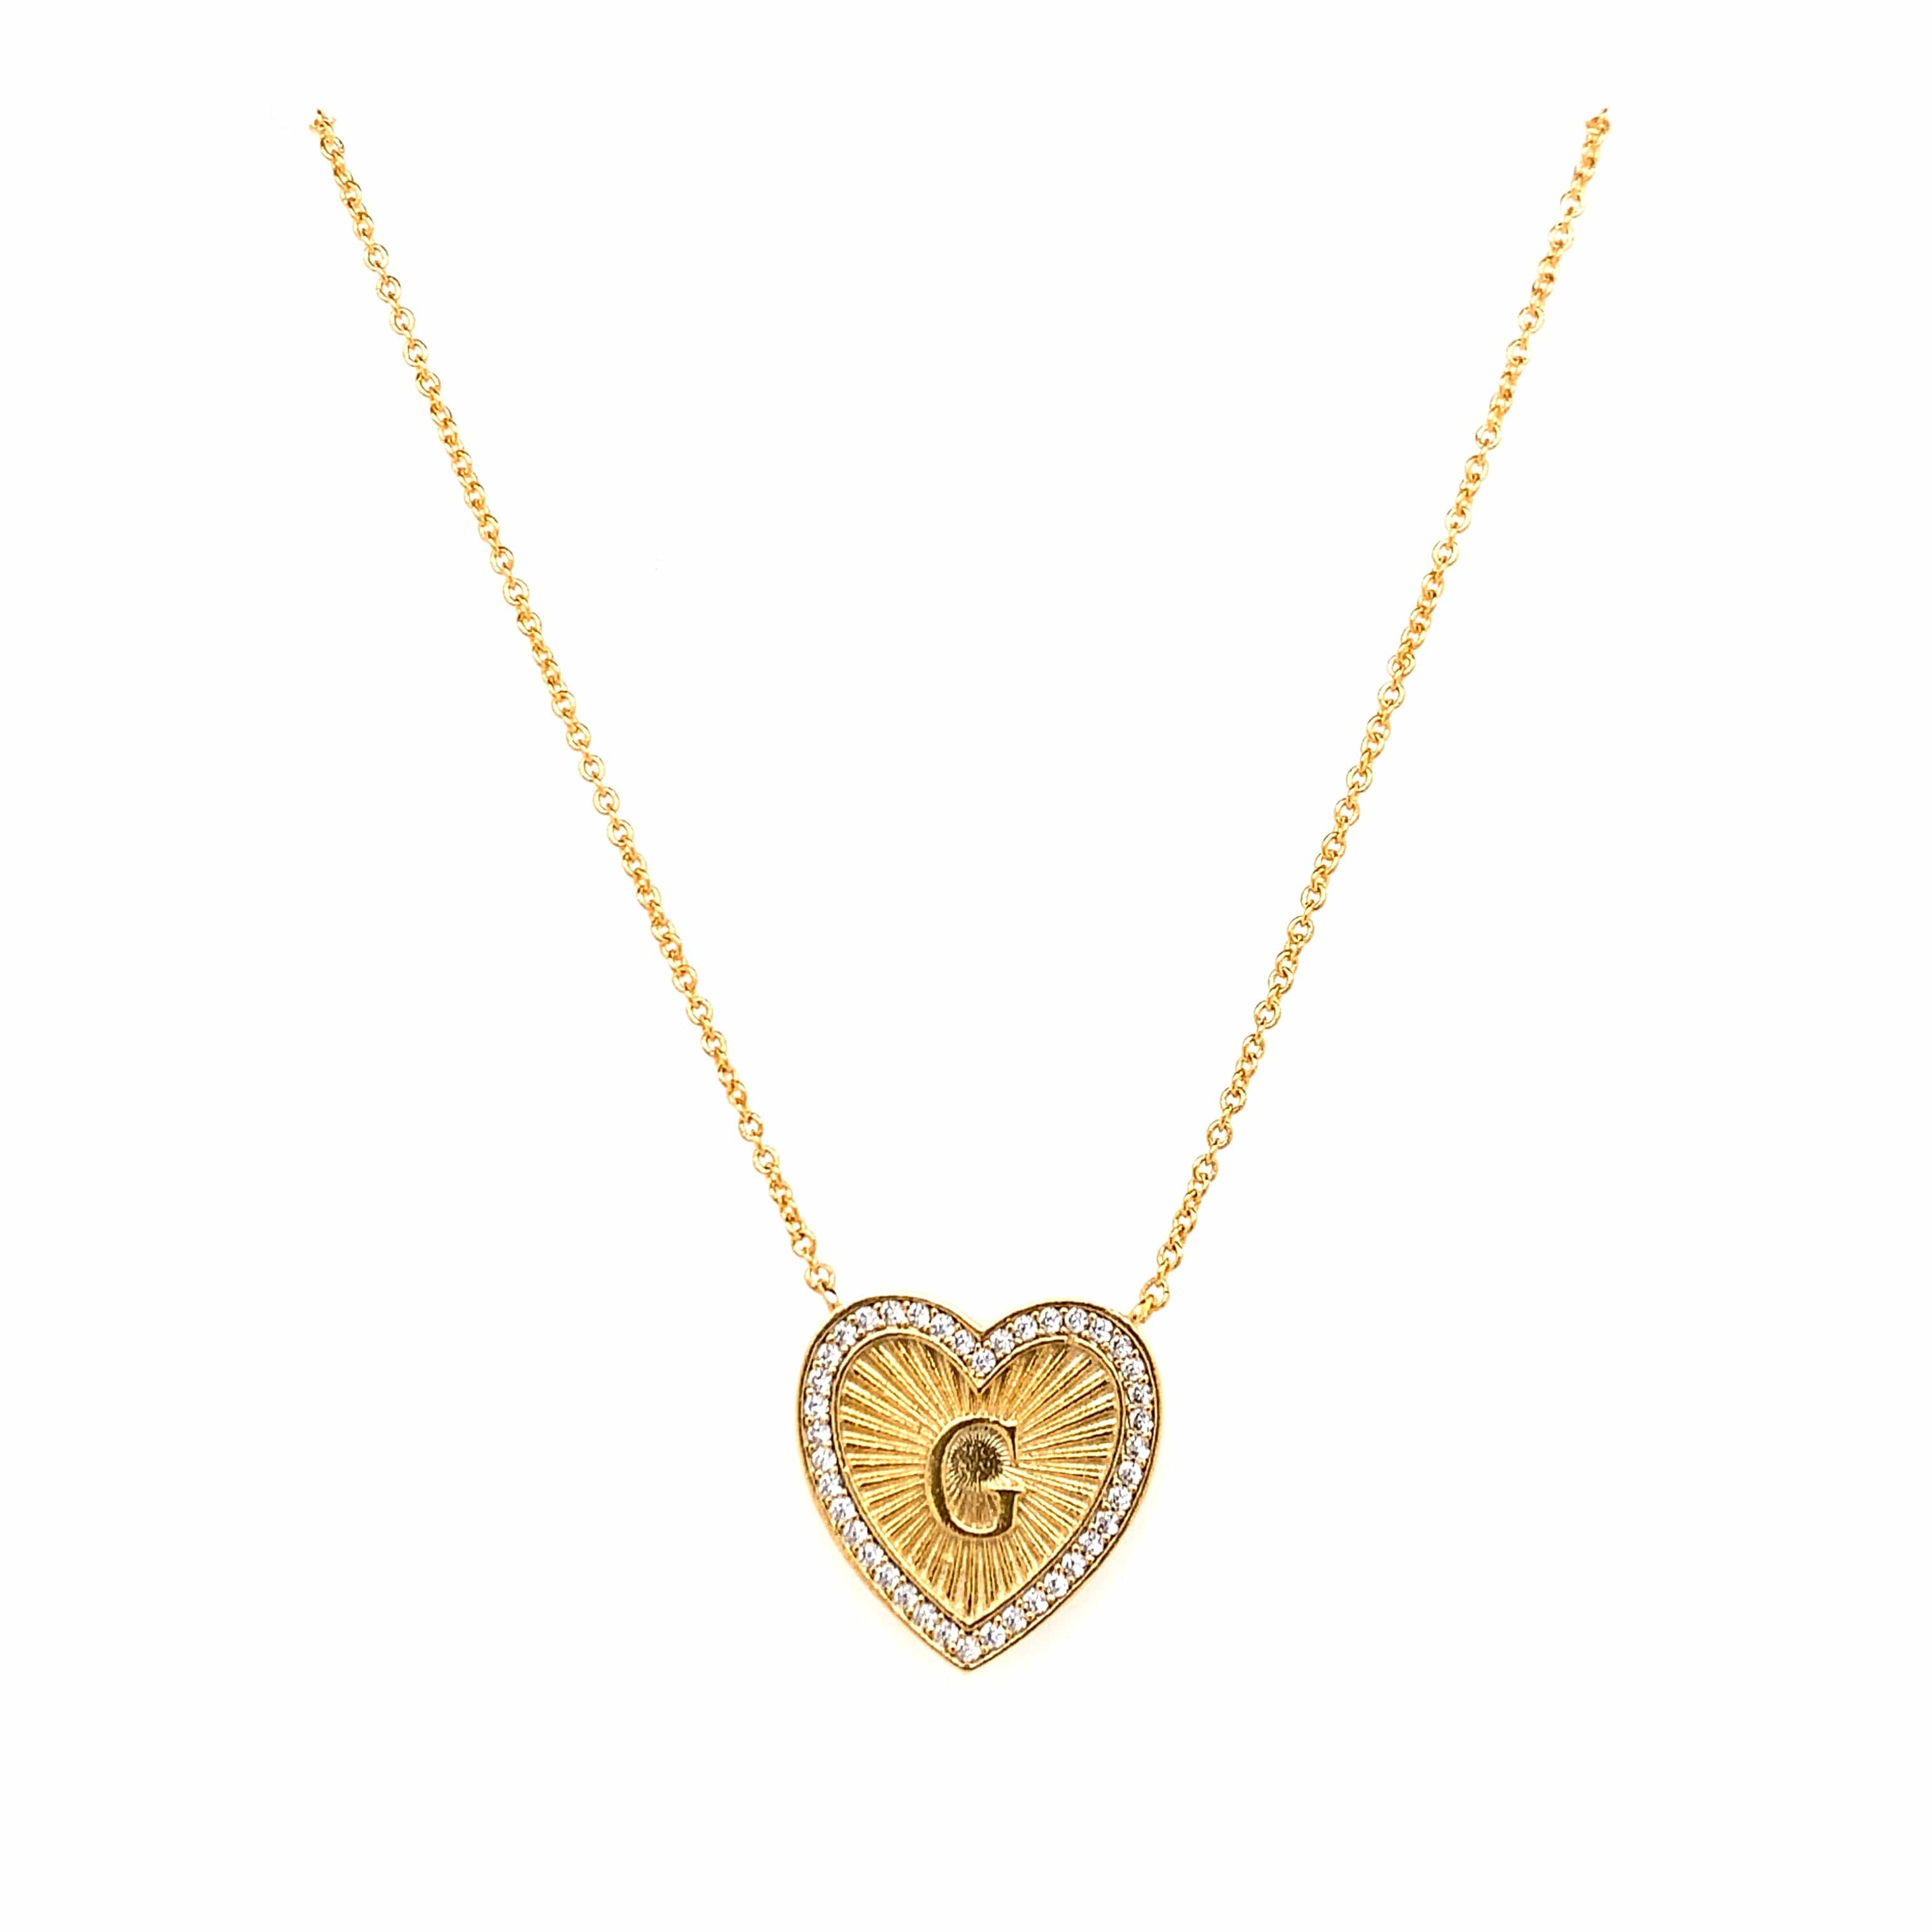 TAI JEWELRY Necklace G Vintage Inspired Heart Initial Necklace